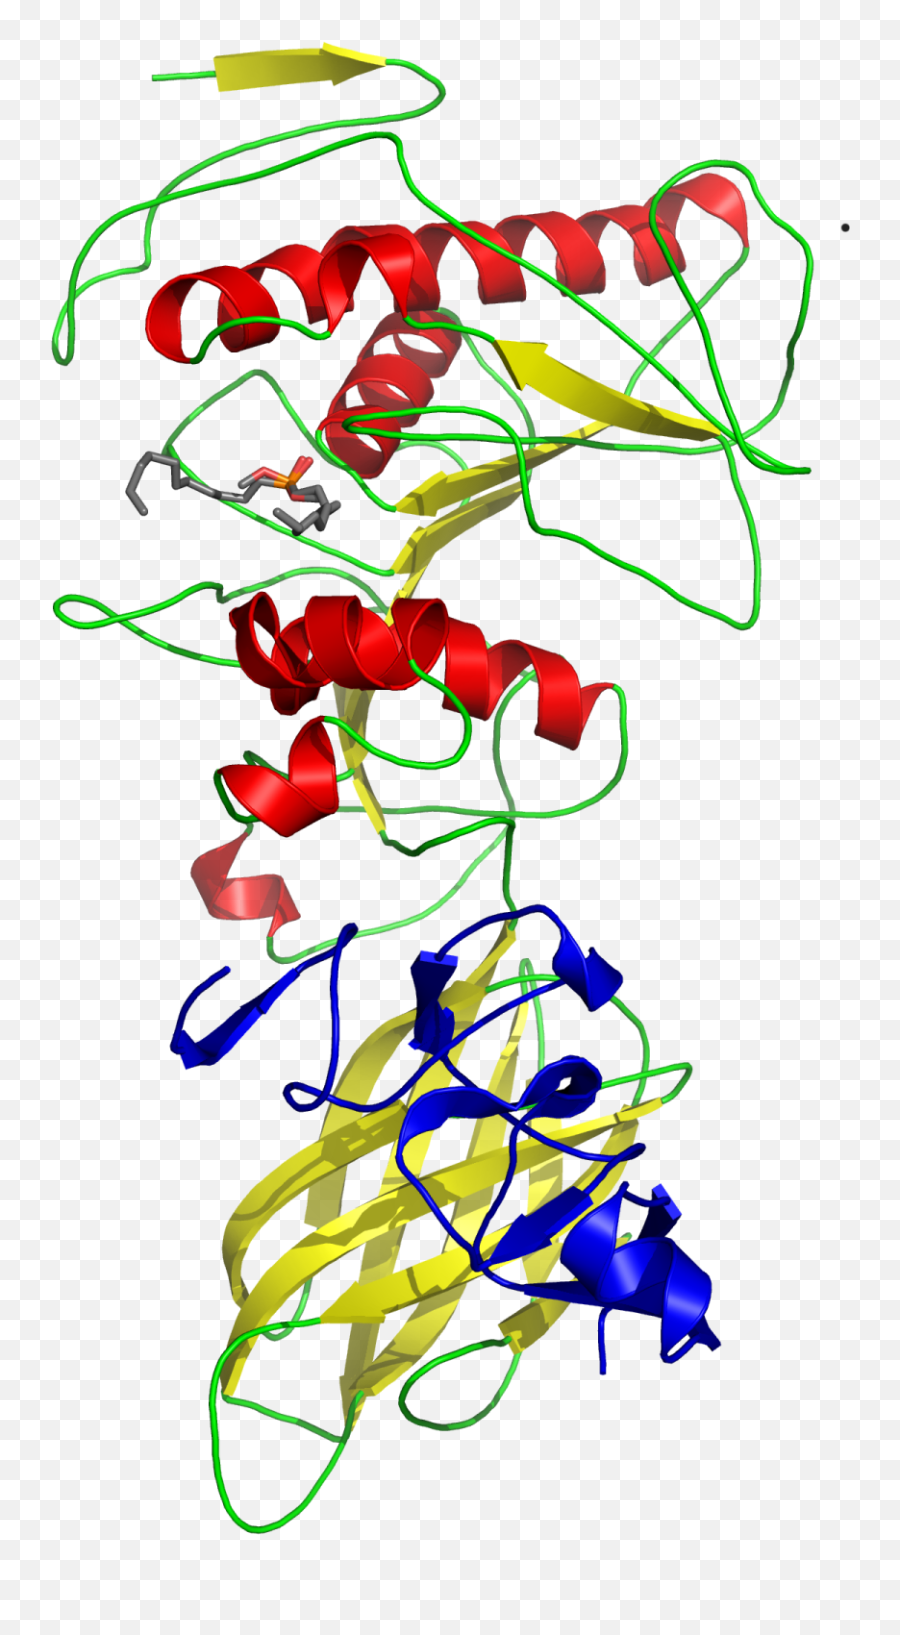 Colipase - Pancreatic Lipase Primary Structure Png,Pancreas Icon